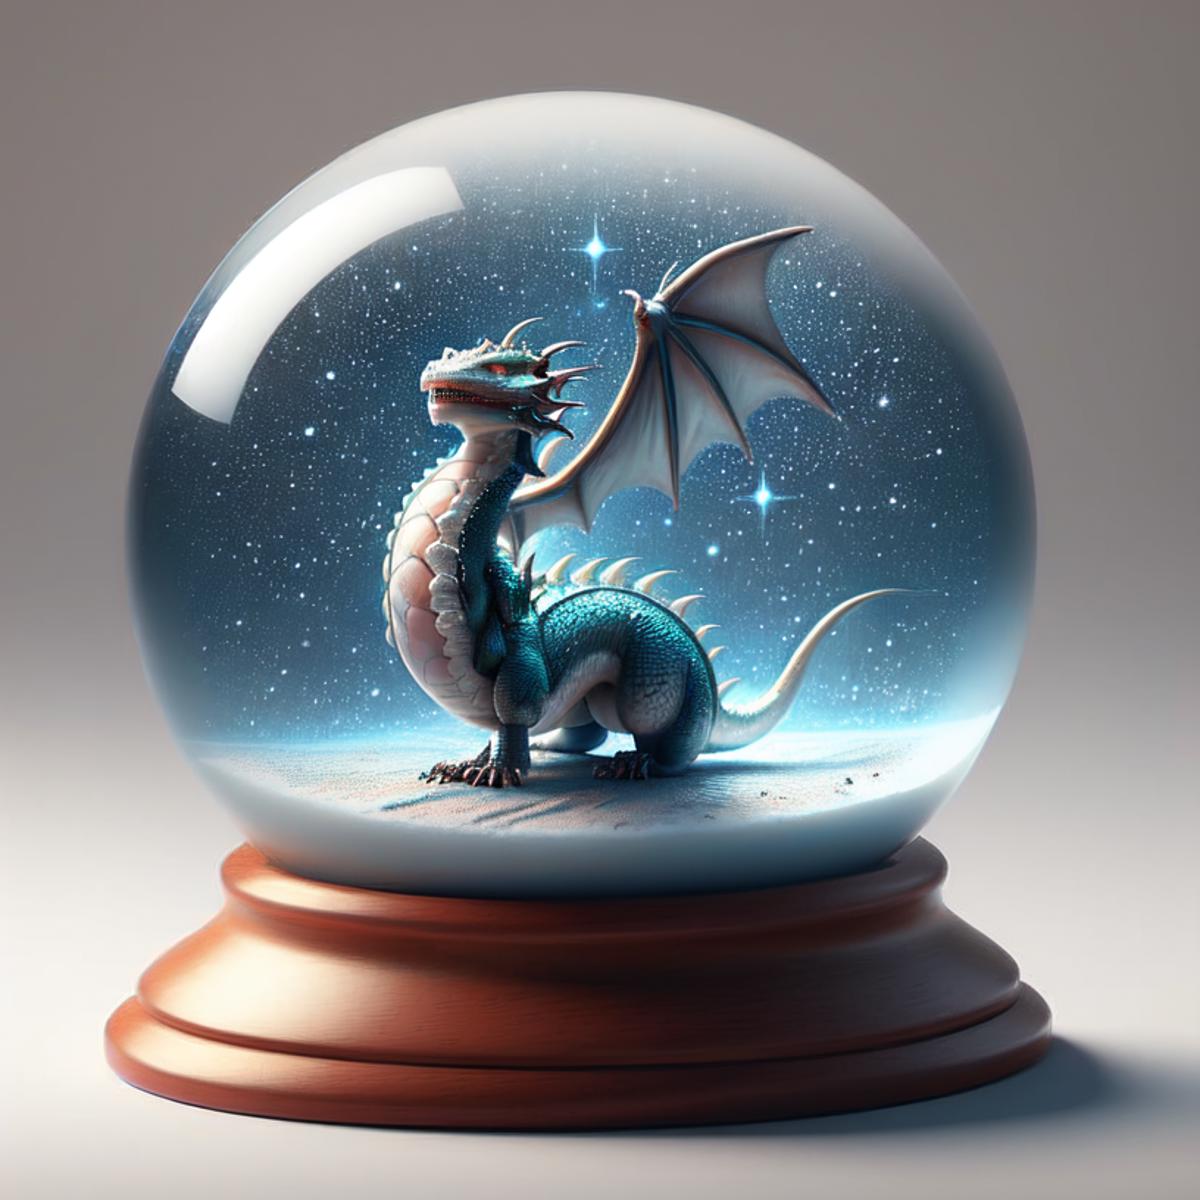 Crystal Ball/Christmas crystal ball/Crystal Ball Gift/水晶球 image by TOPLCL